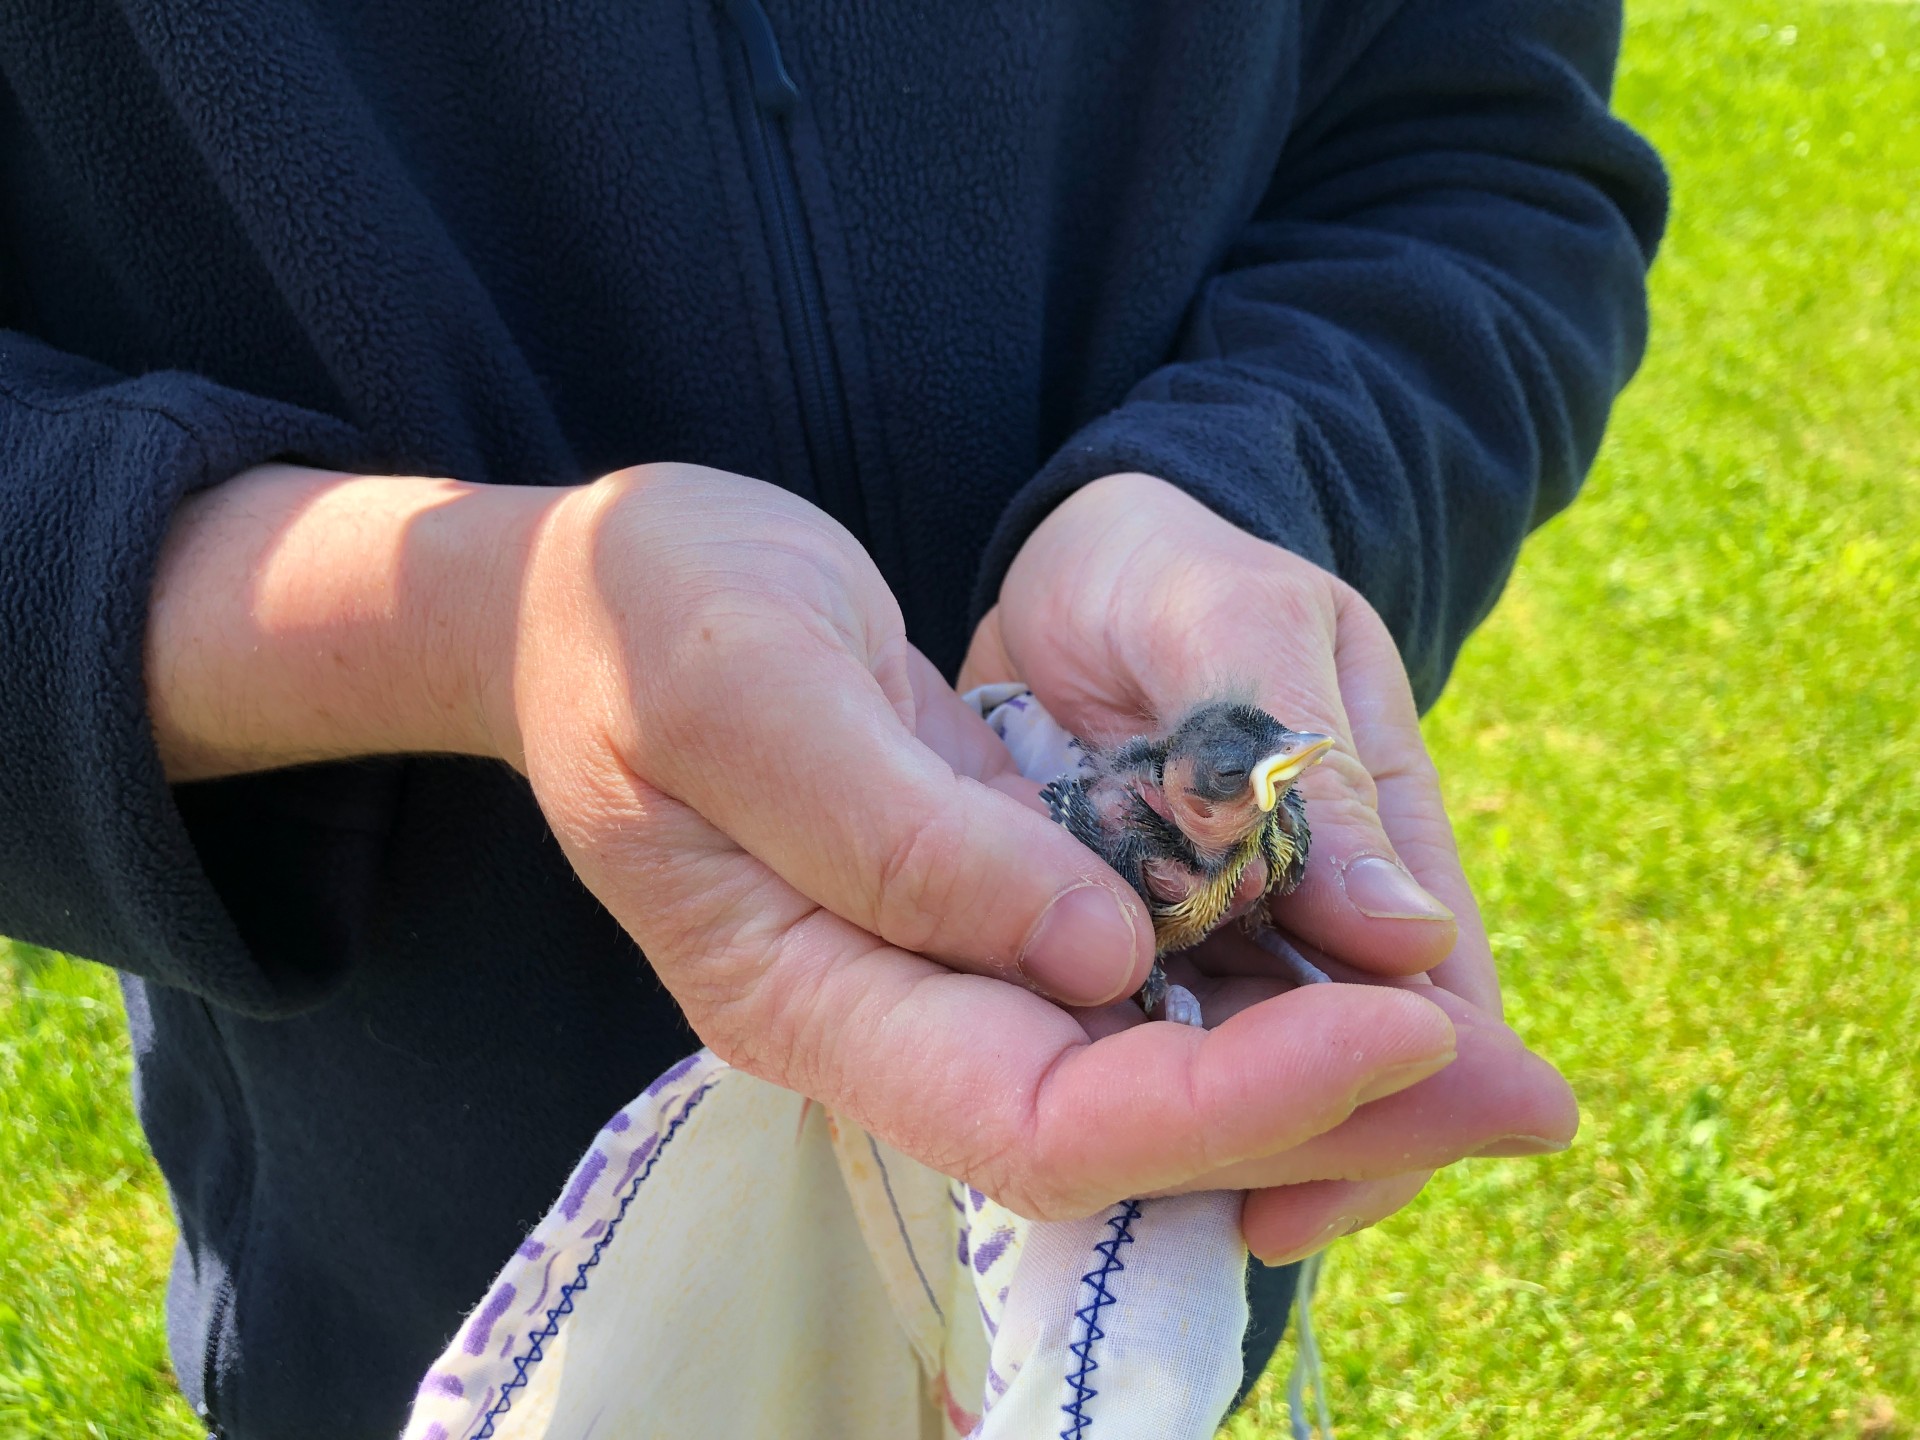 NIAB staff member Kevin Middleton ringing a baby Great Tit (under licence).